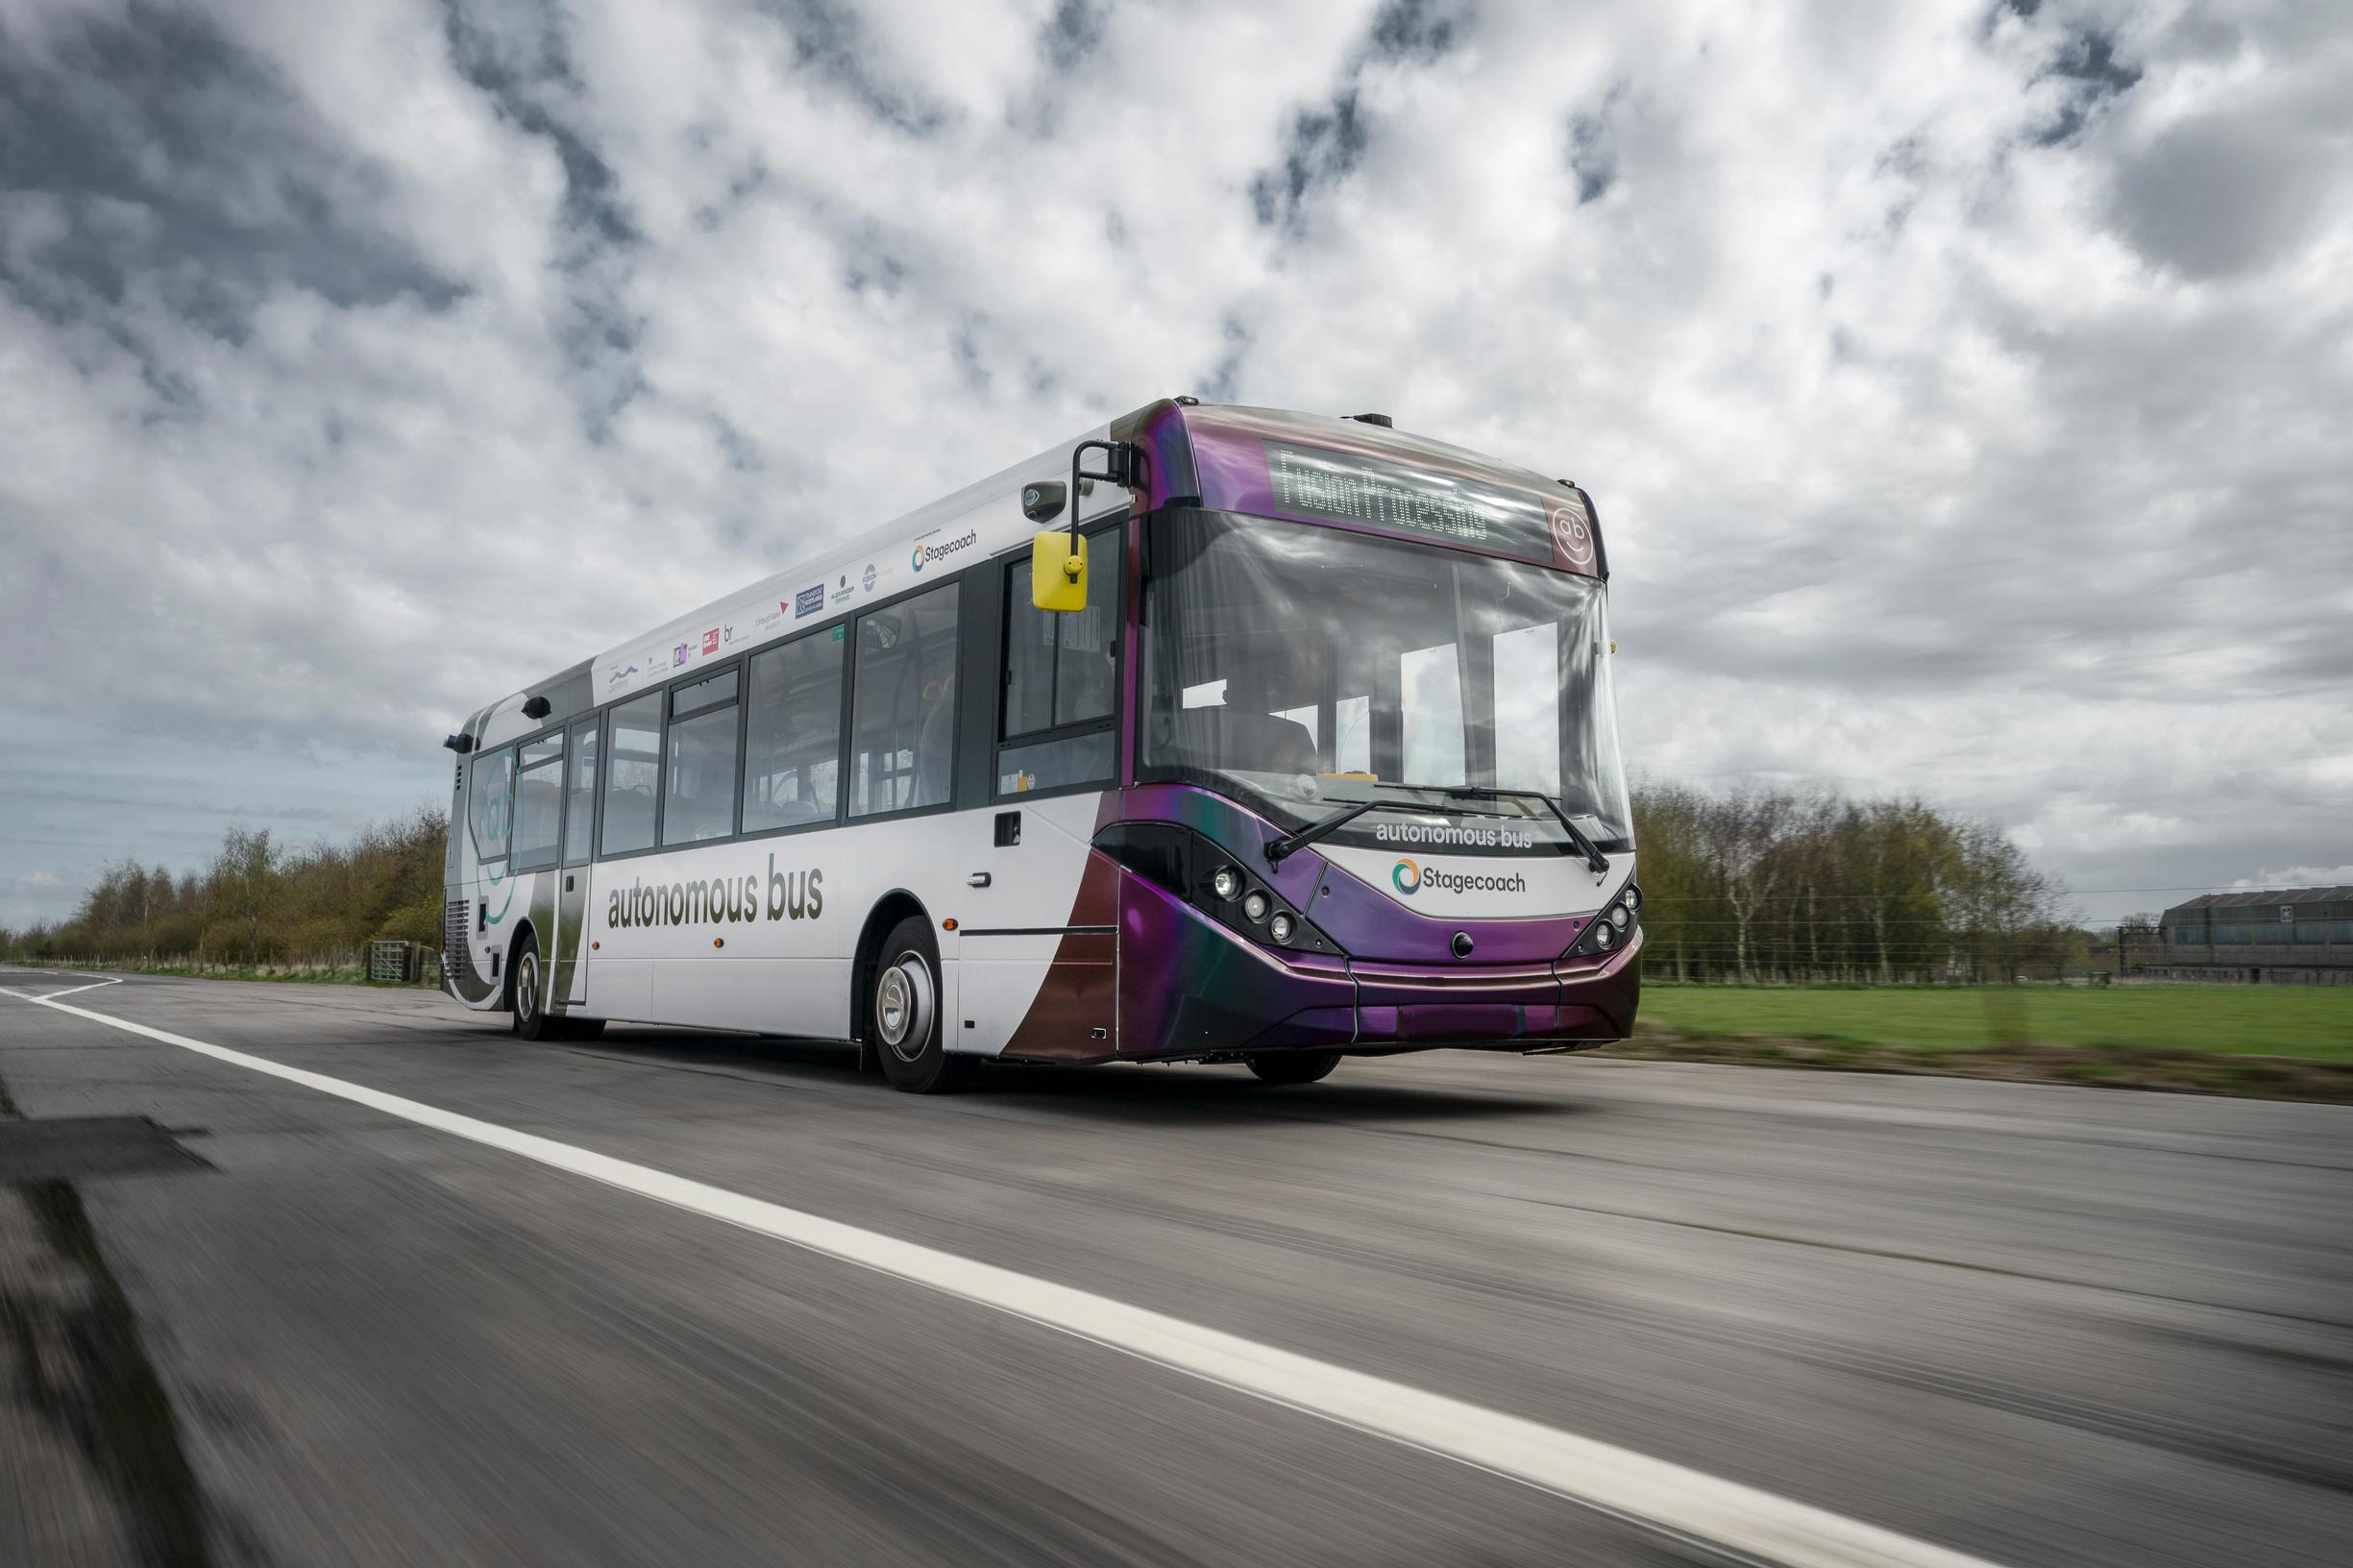 The self-driving buses can carry up to 36 passengers